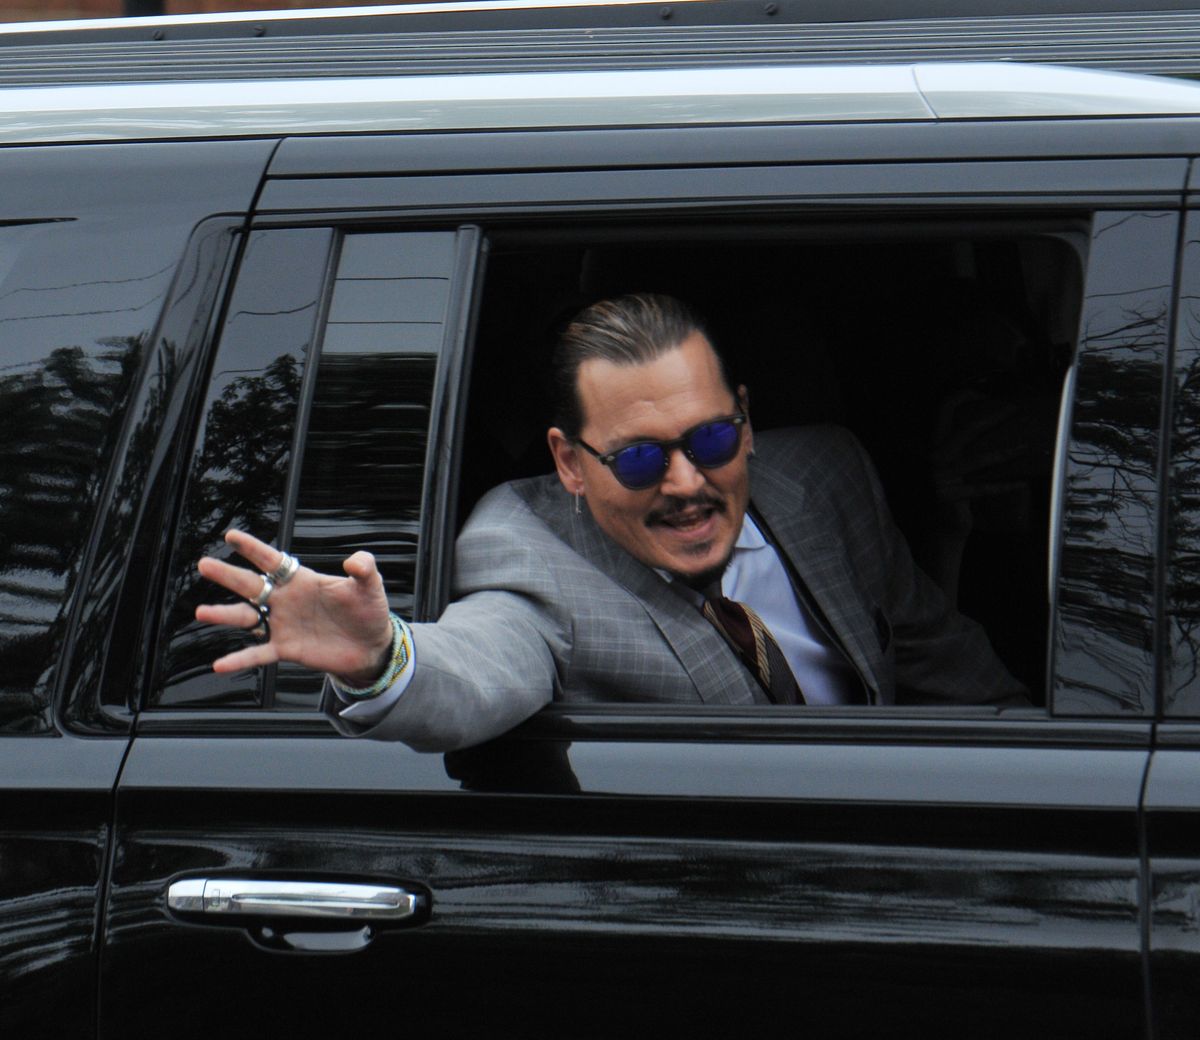 Johnny Depp Appears in Good Spirits as He Exits The Courthouse in Fairfax, Virginia.